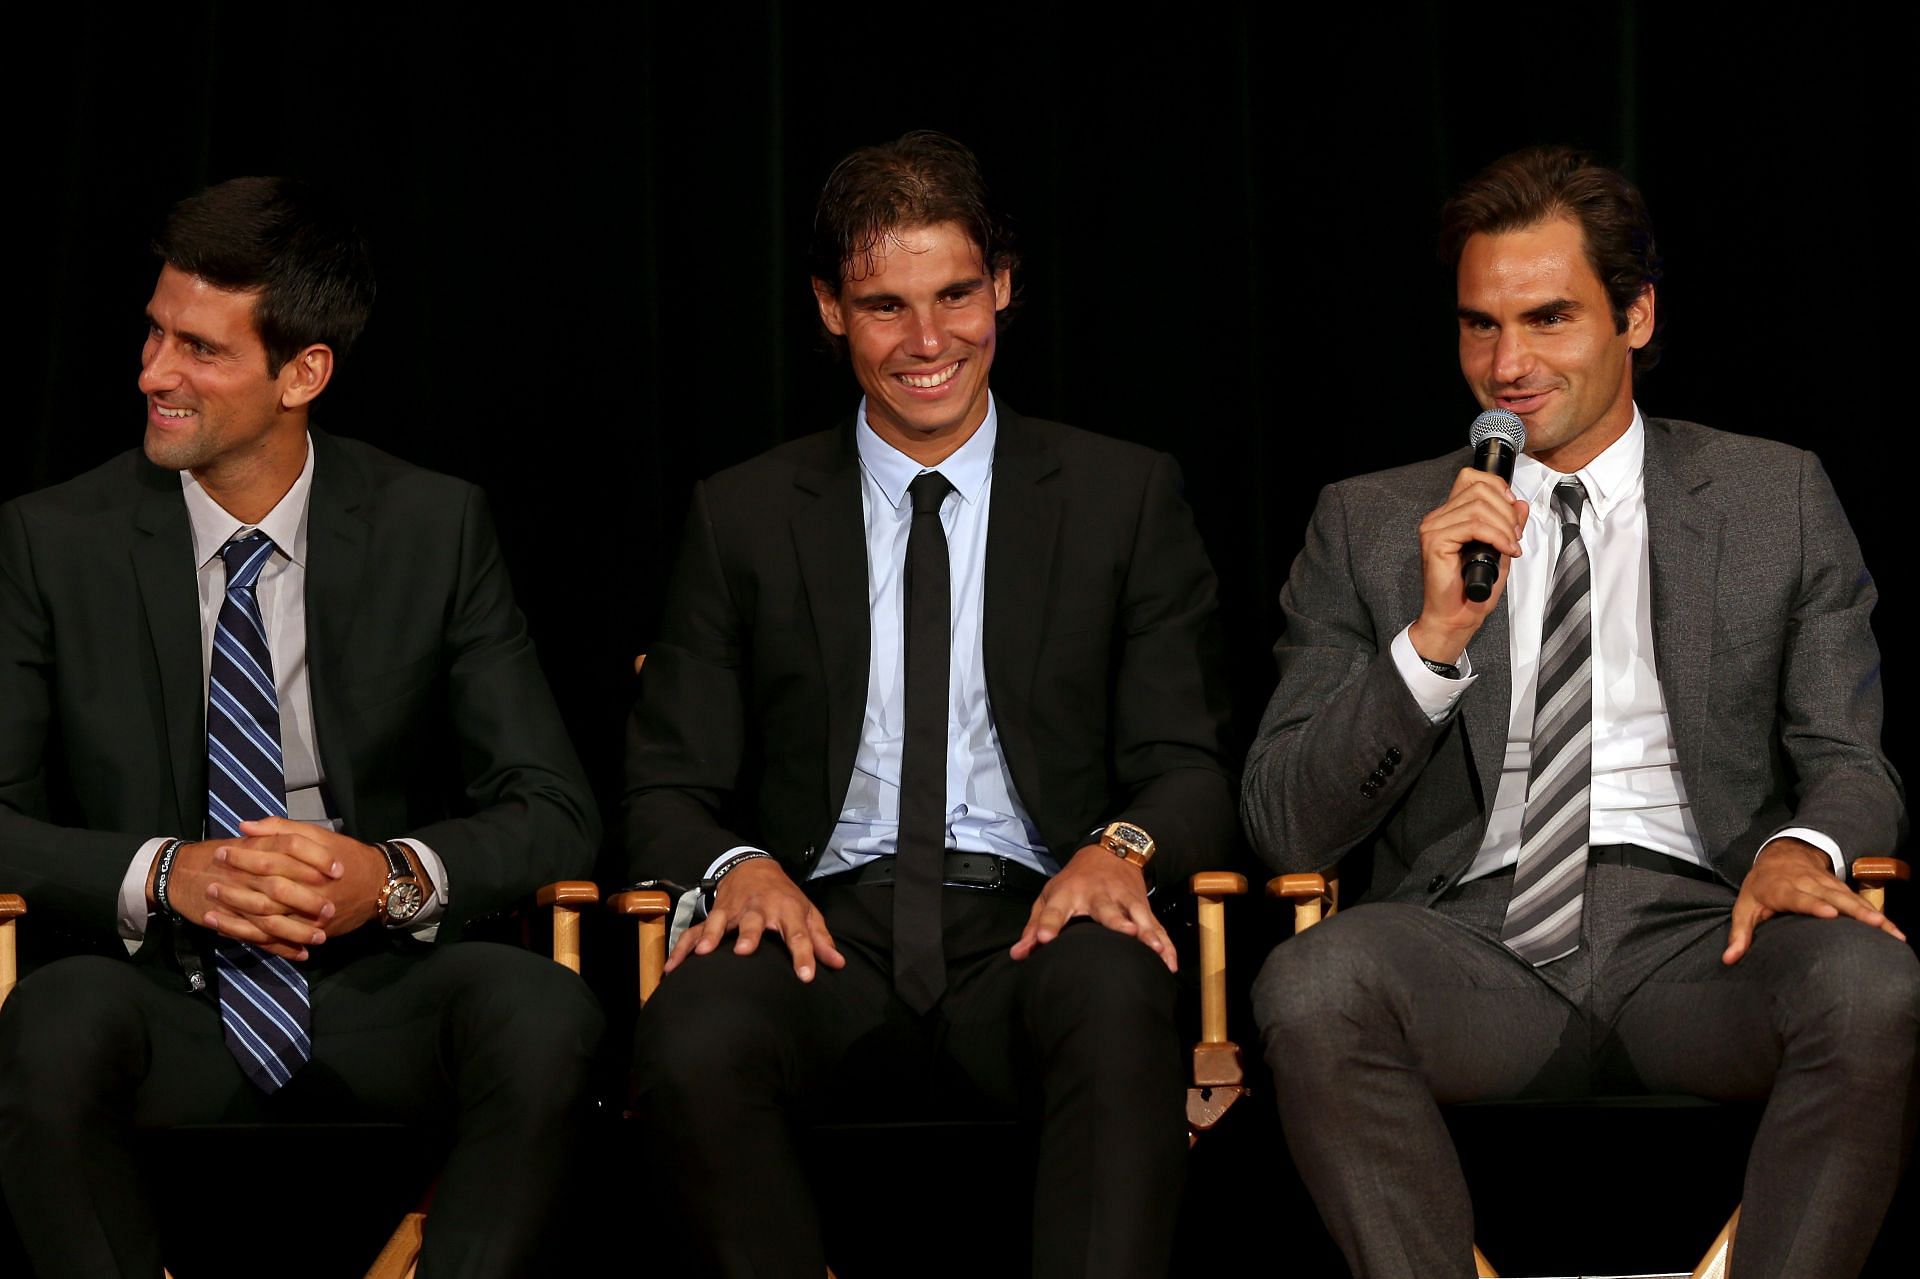 The Big 3 at the ATP Heritage Celebration in 2013